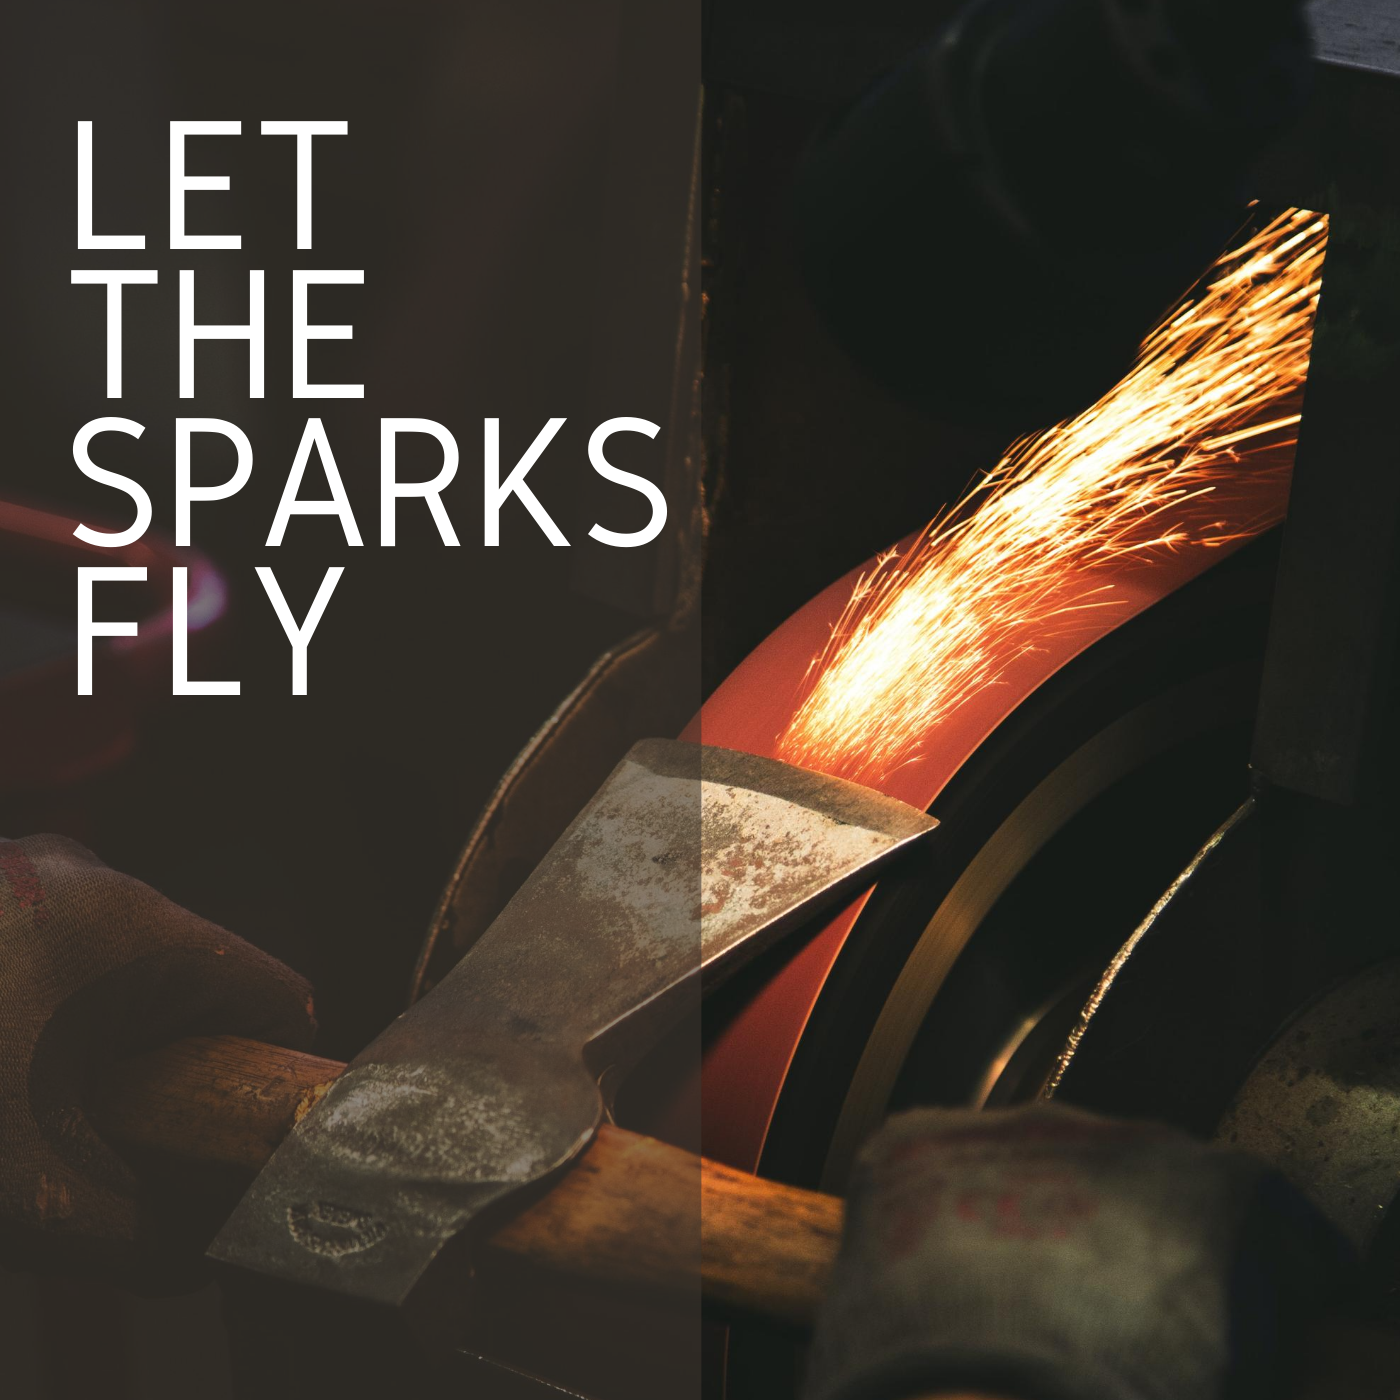 Let the Sparks Fly